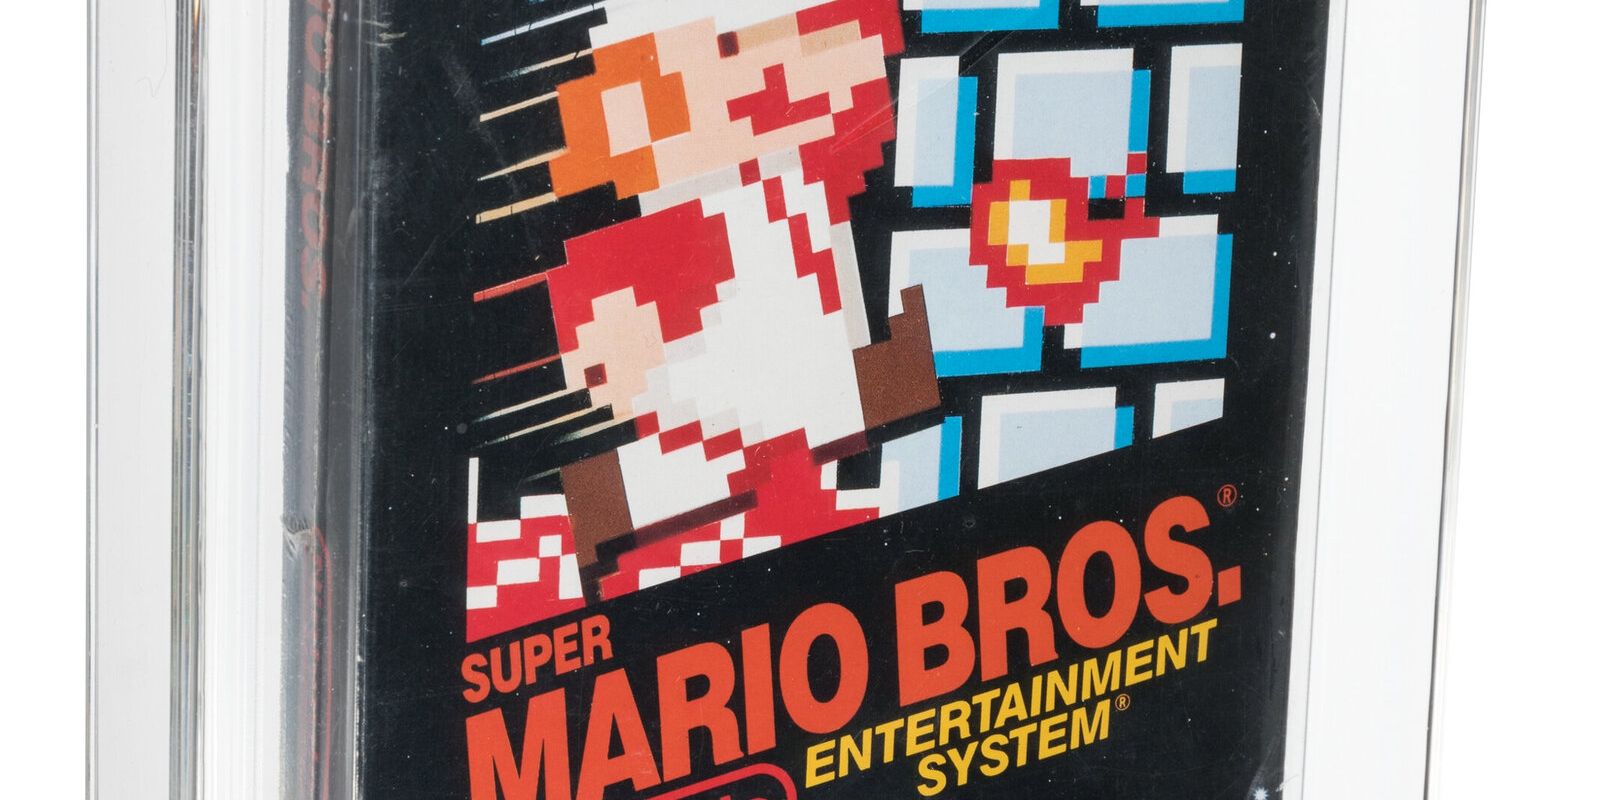 How 'Super Mario Bros.' Became the Most Expensive Game Ever Sold